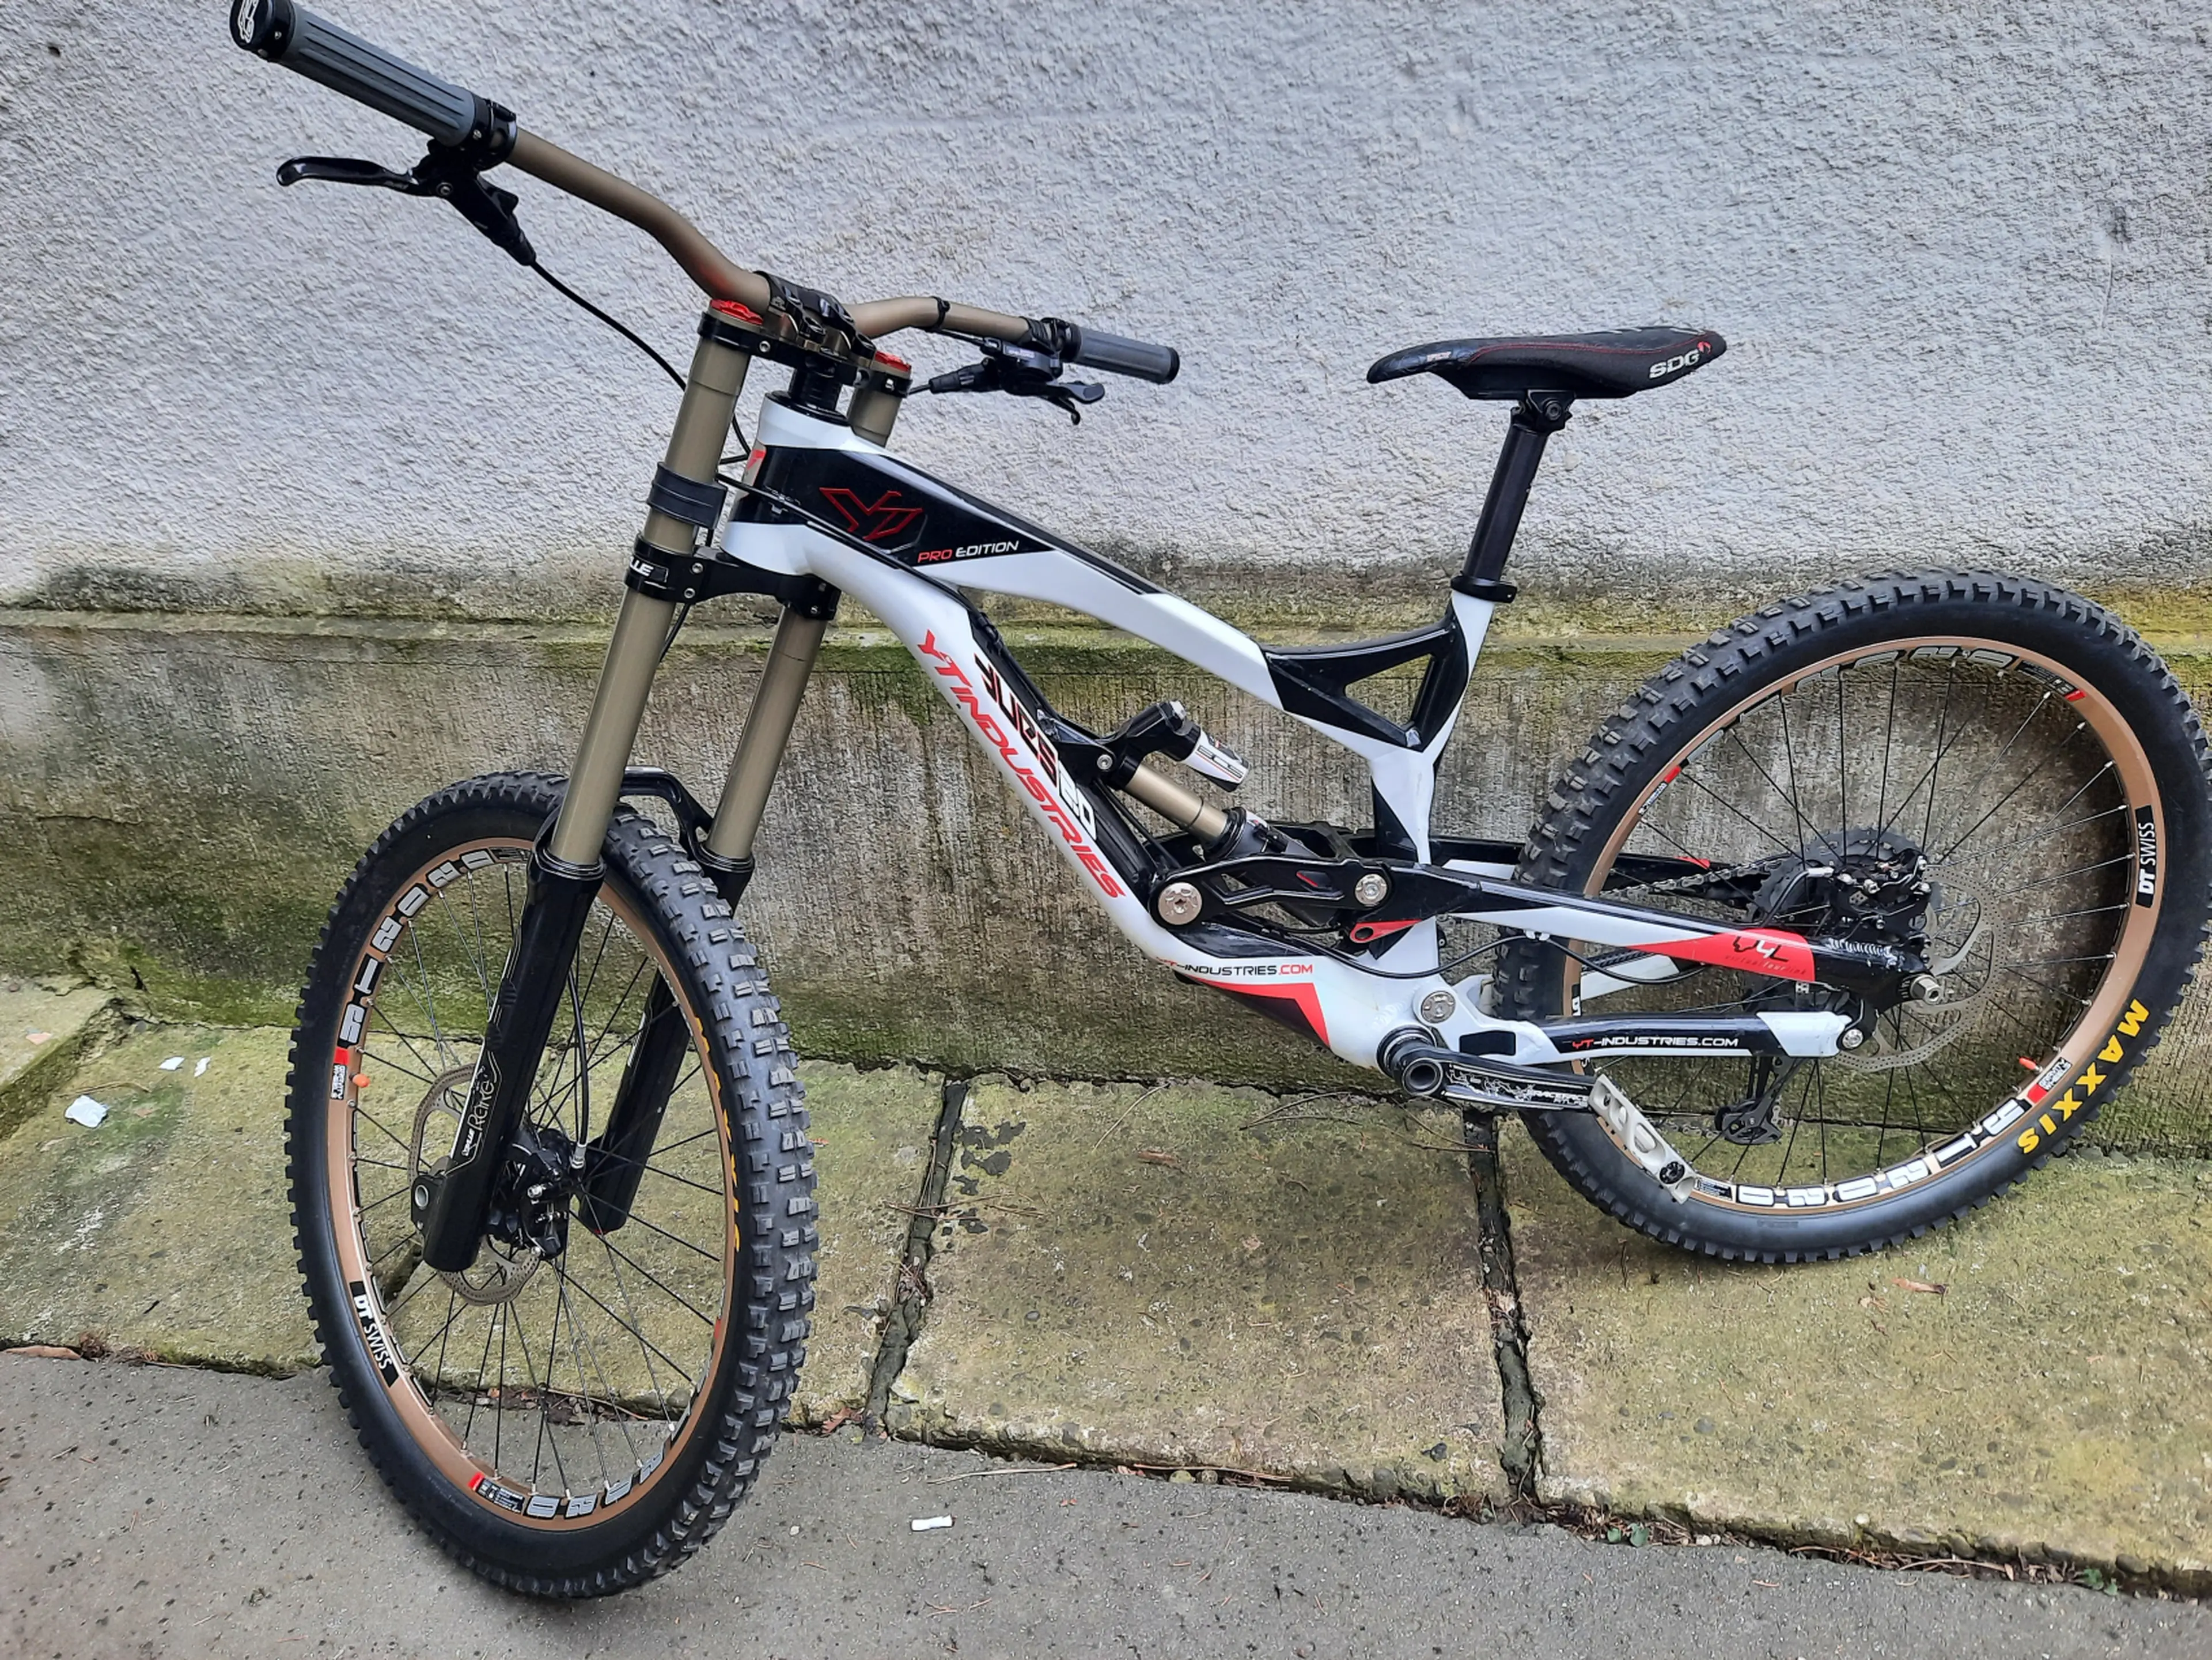 1. YT Industries Pro edition